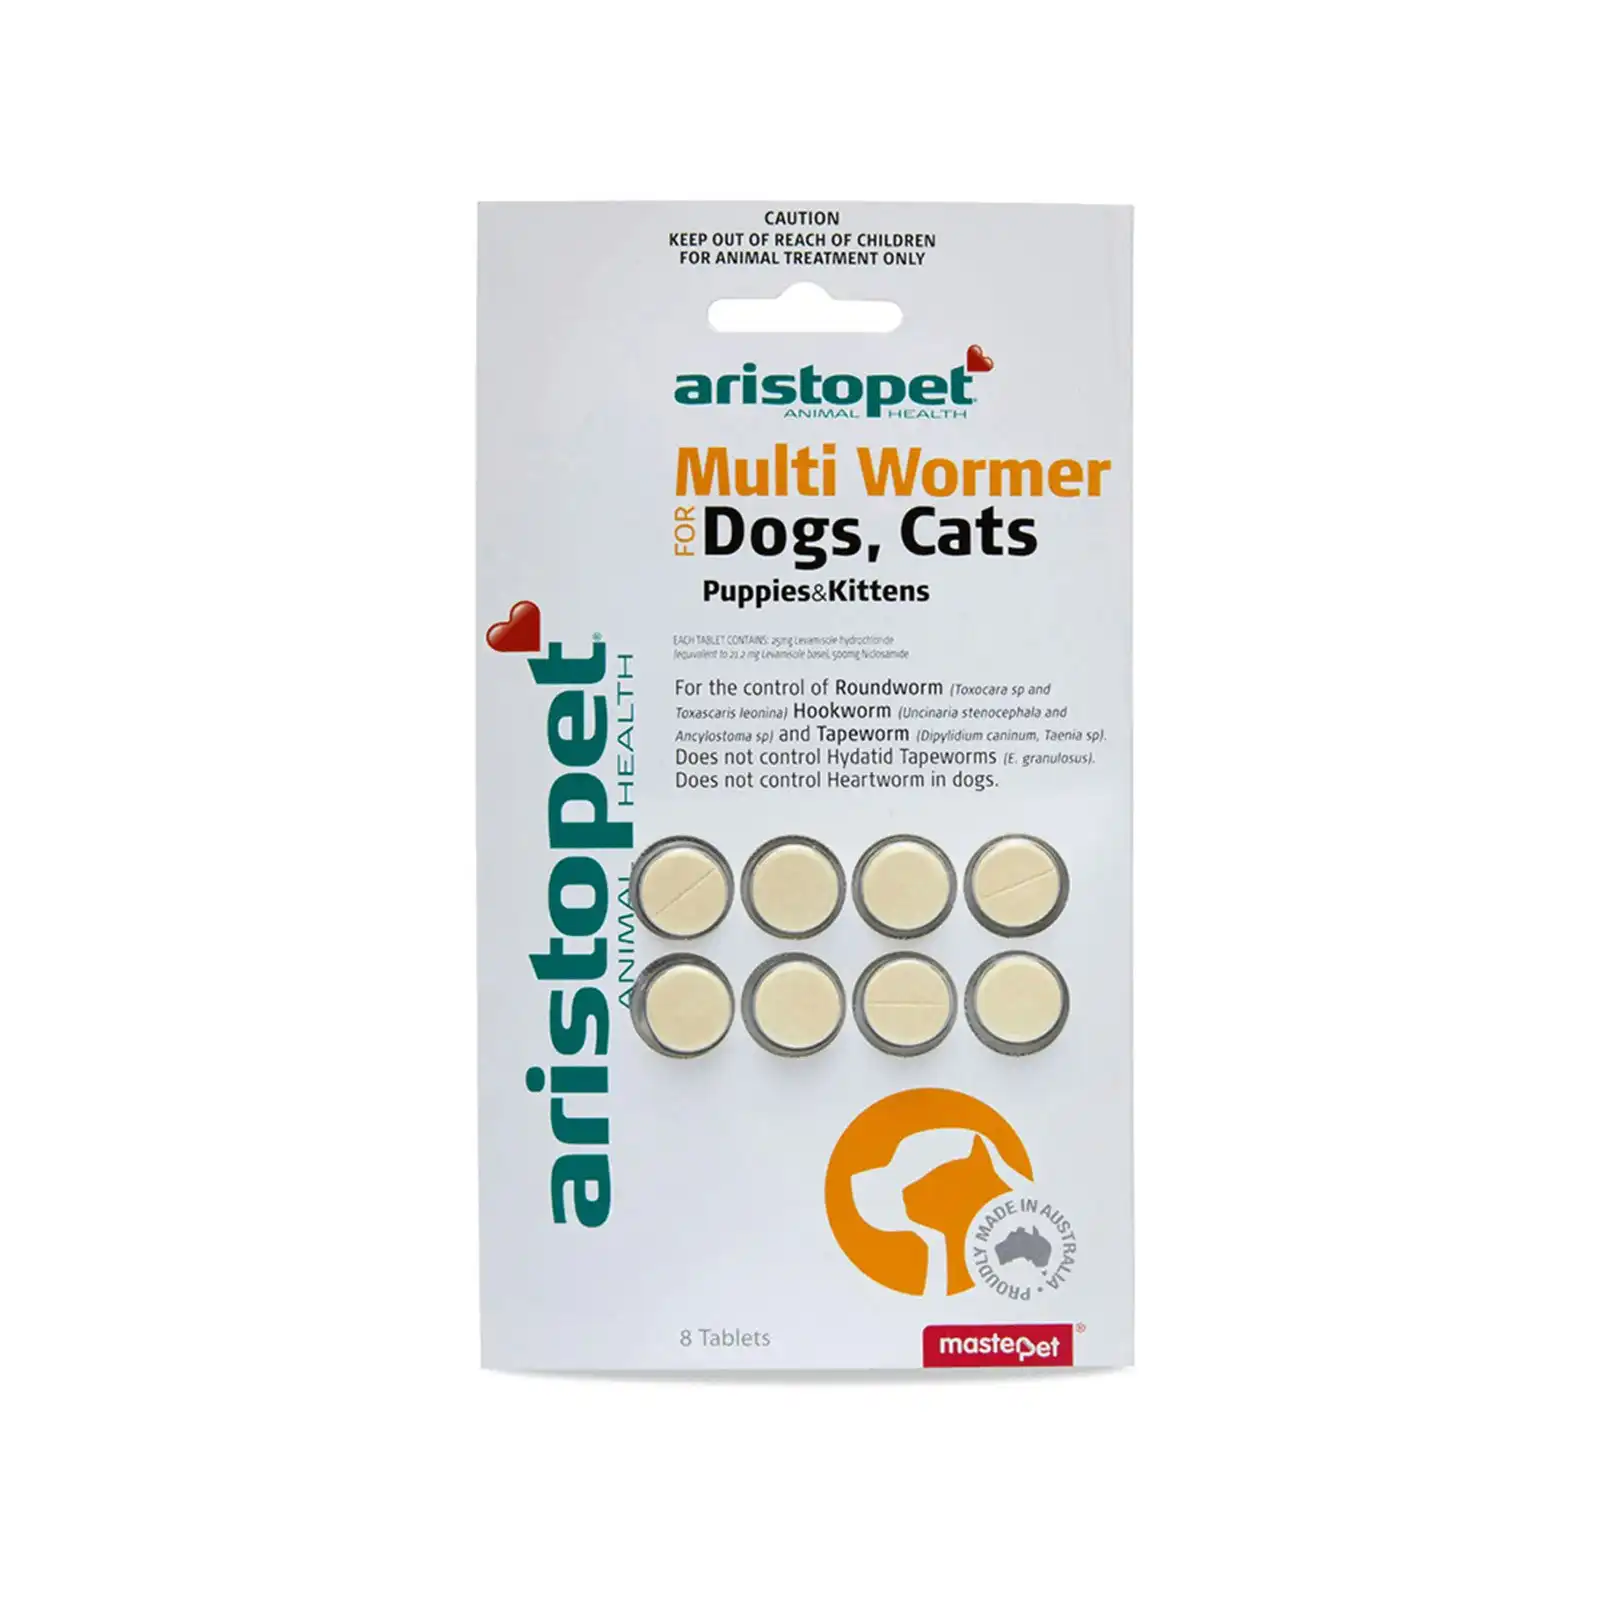 Aristopet Multiwormer Tablets Dogs and Cats 8 Tablets